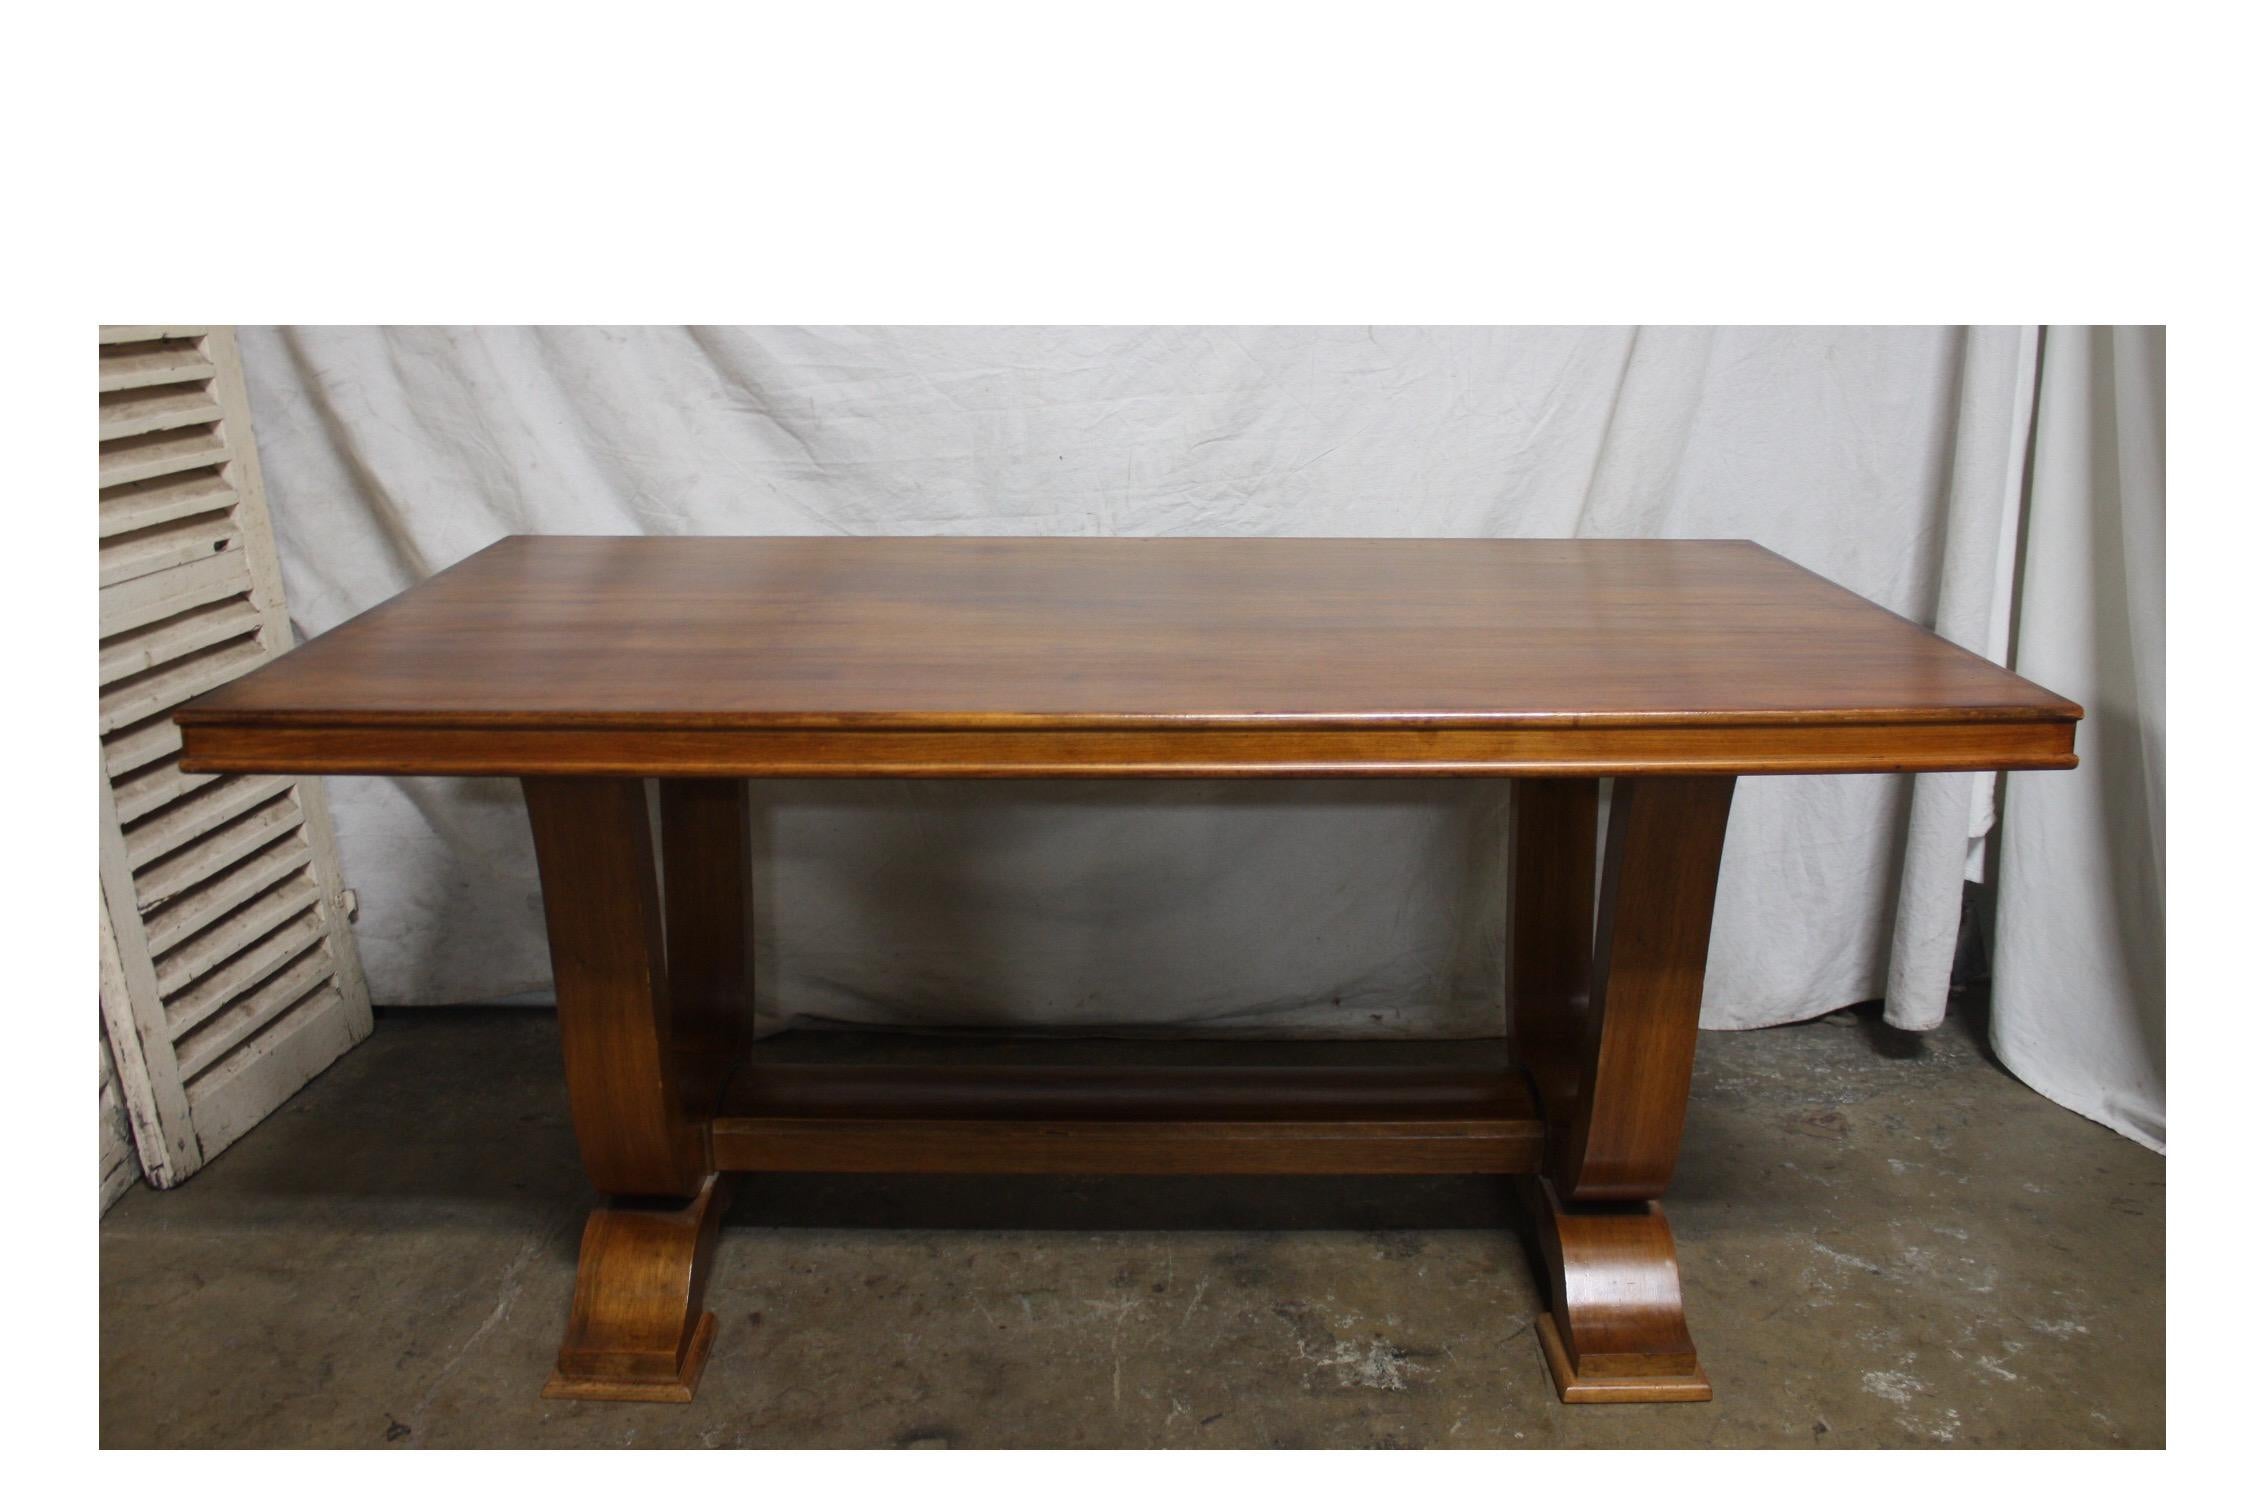 Mid-20th century French dining table
Dimensions of the table with the 2 extensions is 89in. W x 45in. D x 29.25in. H.